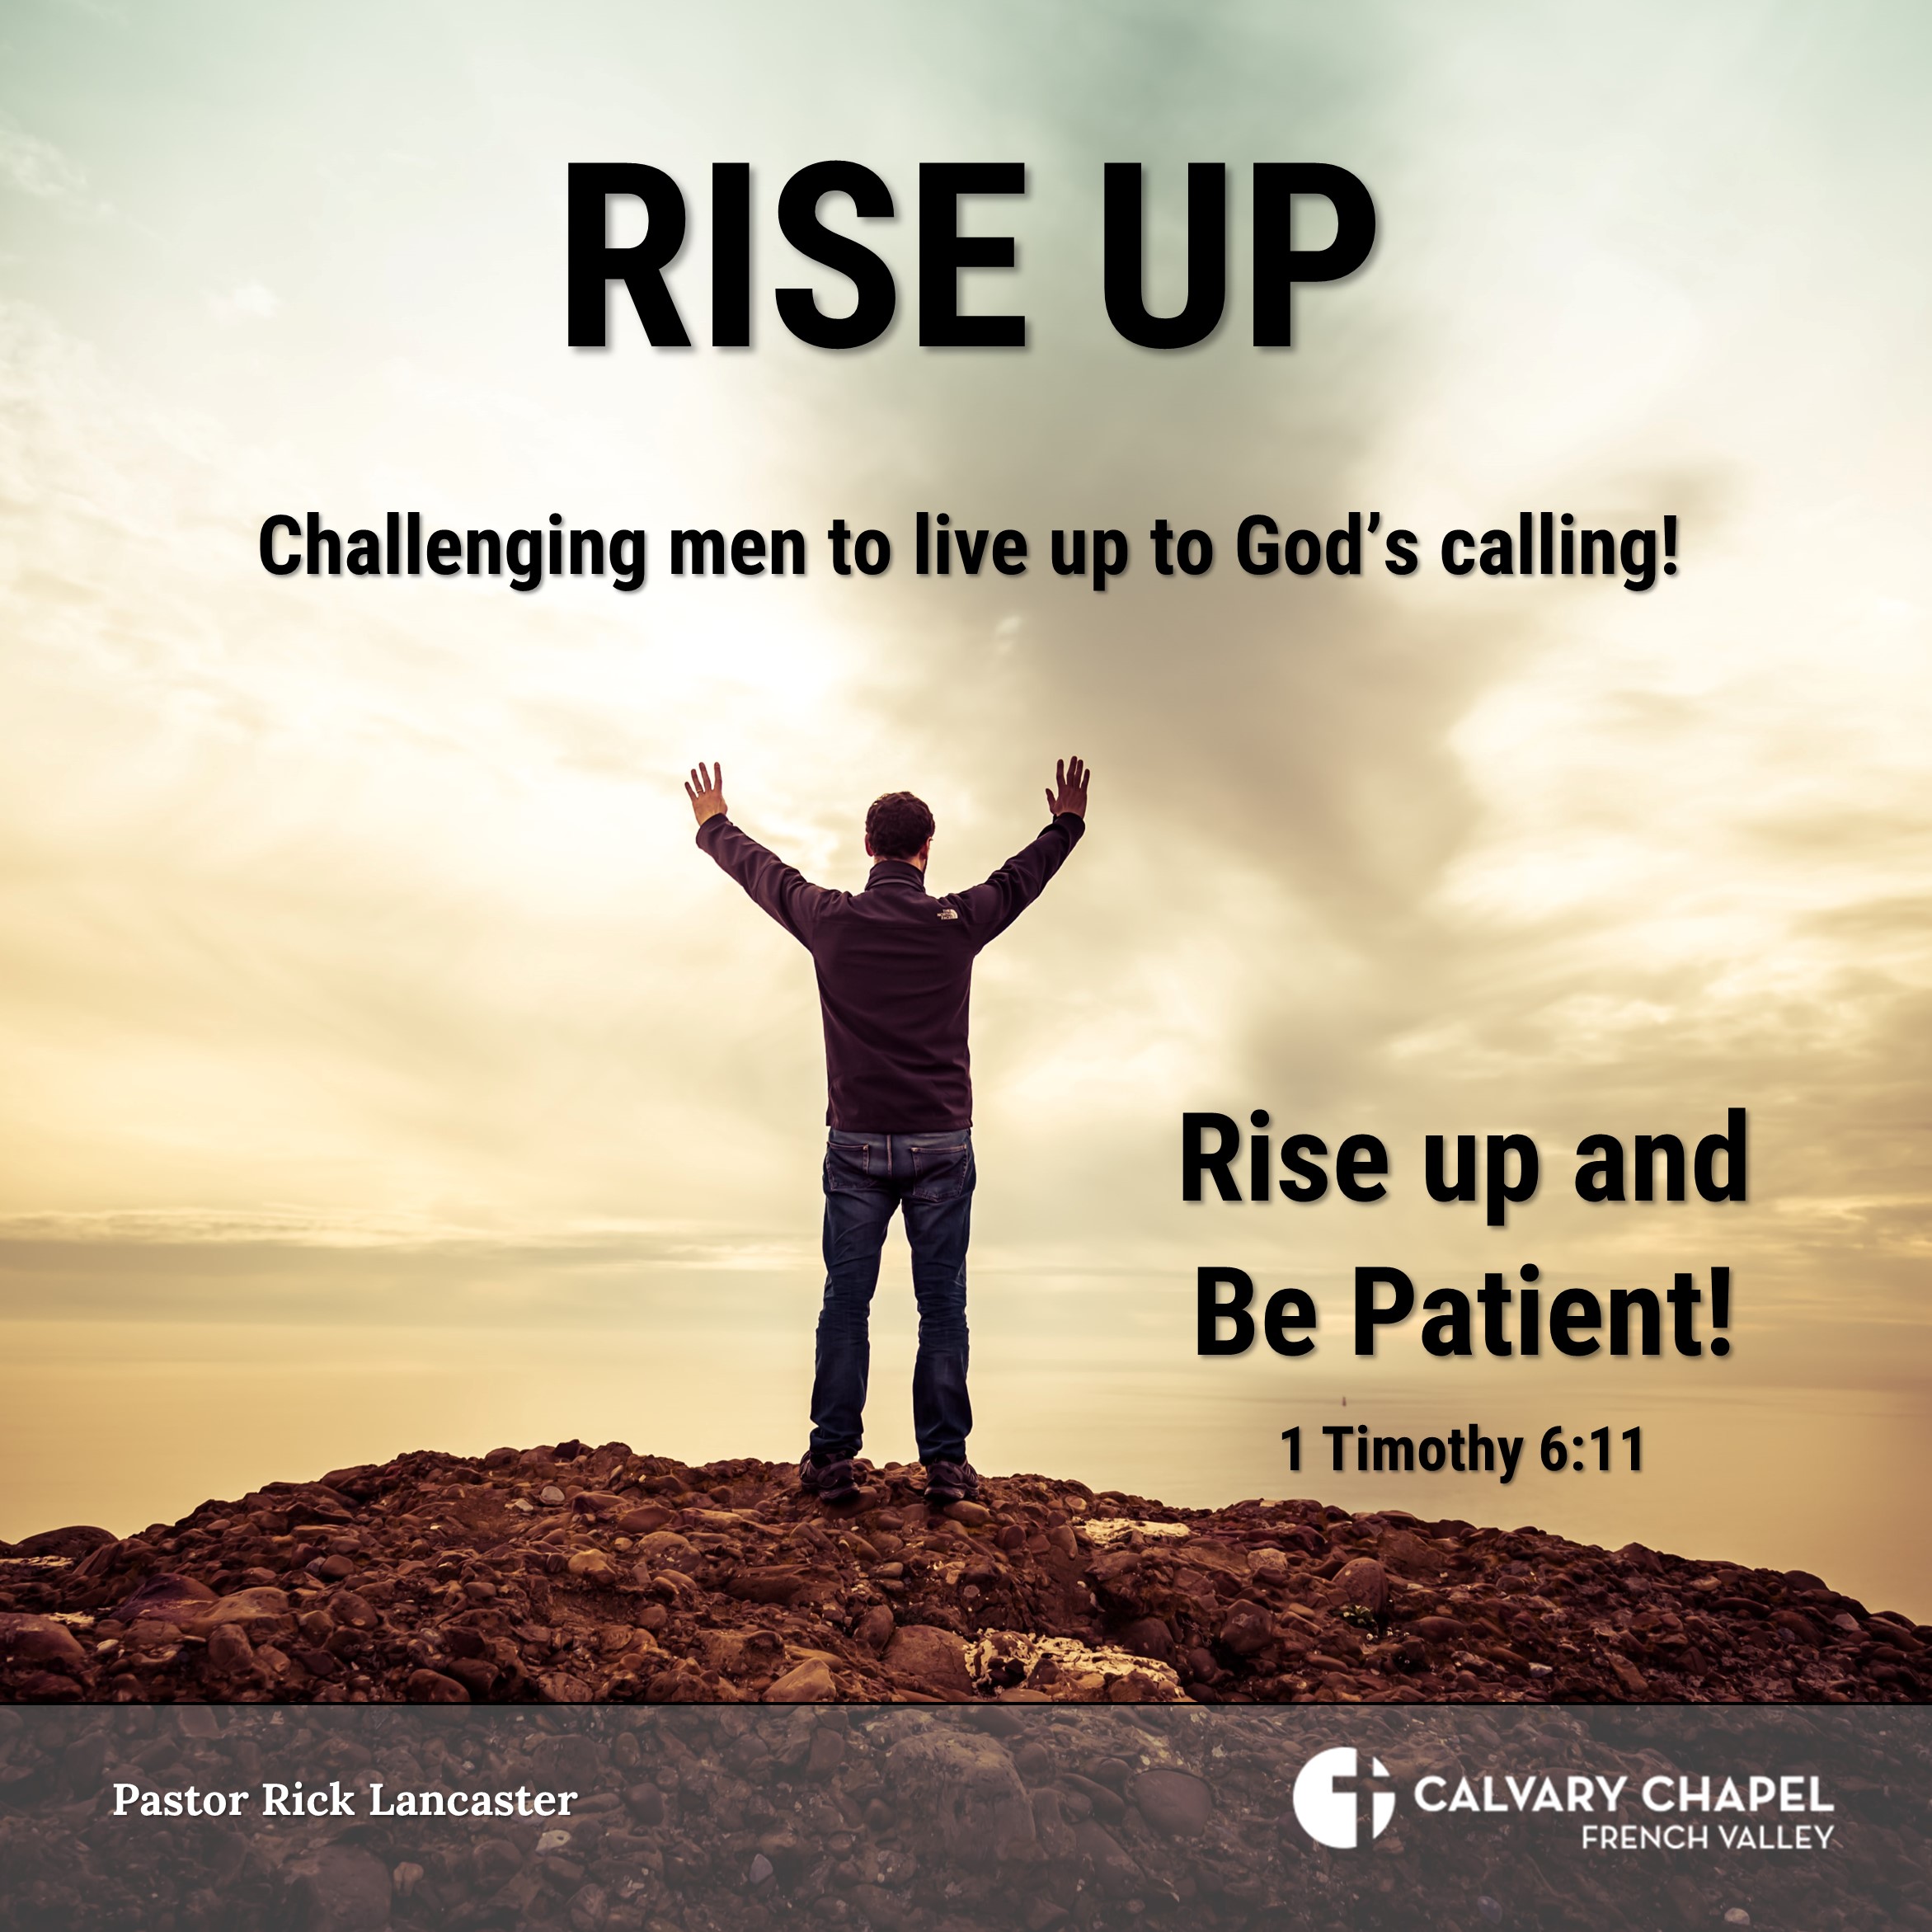 Rise up and be patient! 1 Timothy 6:11 - Men's Breakfast - October 21, 2023 - RISE UP: Challenging men to live up to God’s calling!